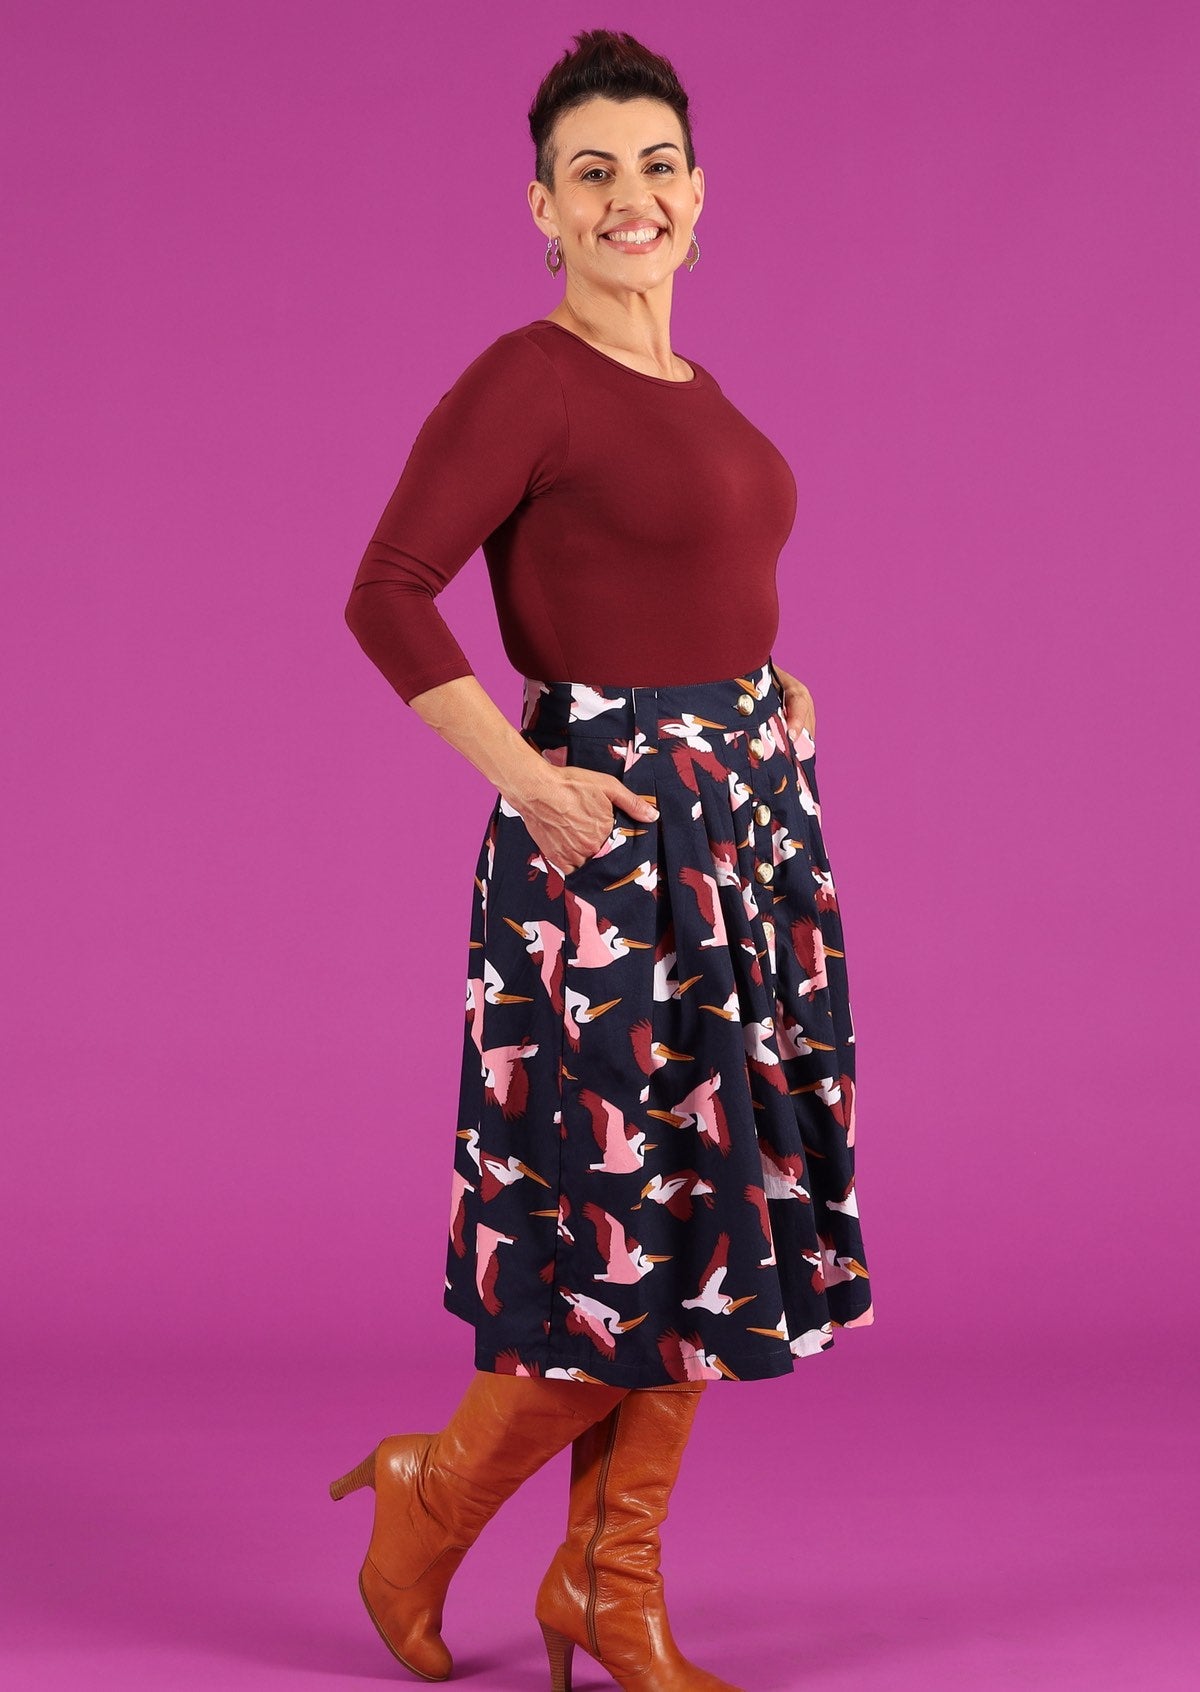 retro skirt with pockets and belt loops